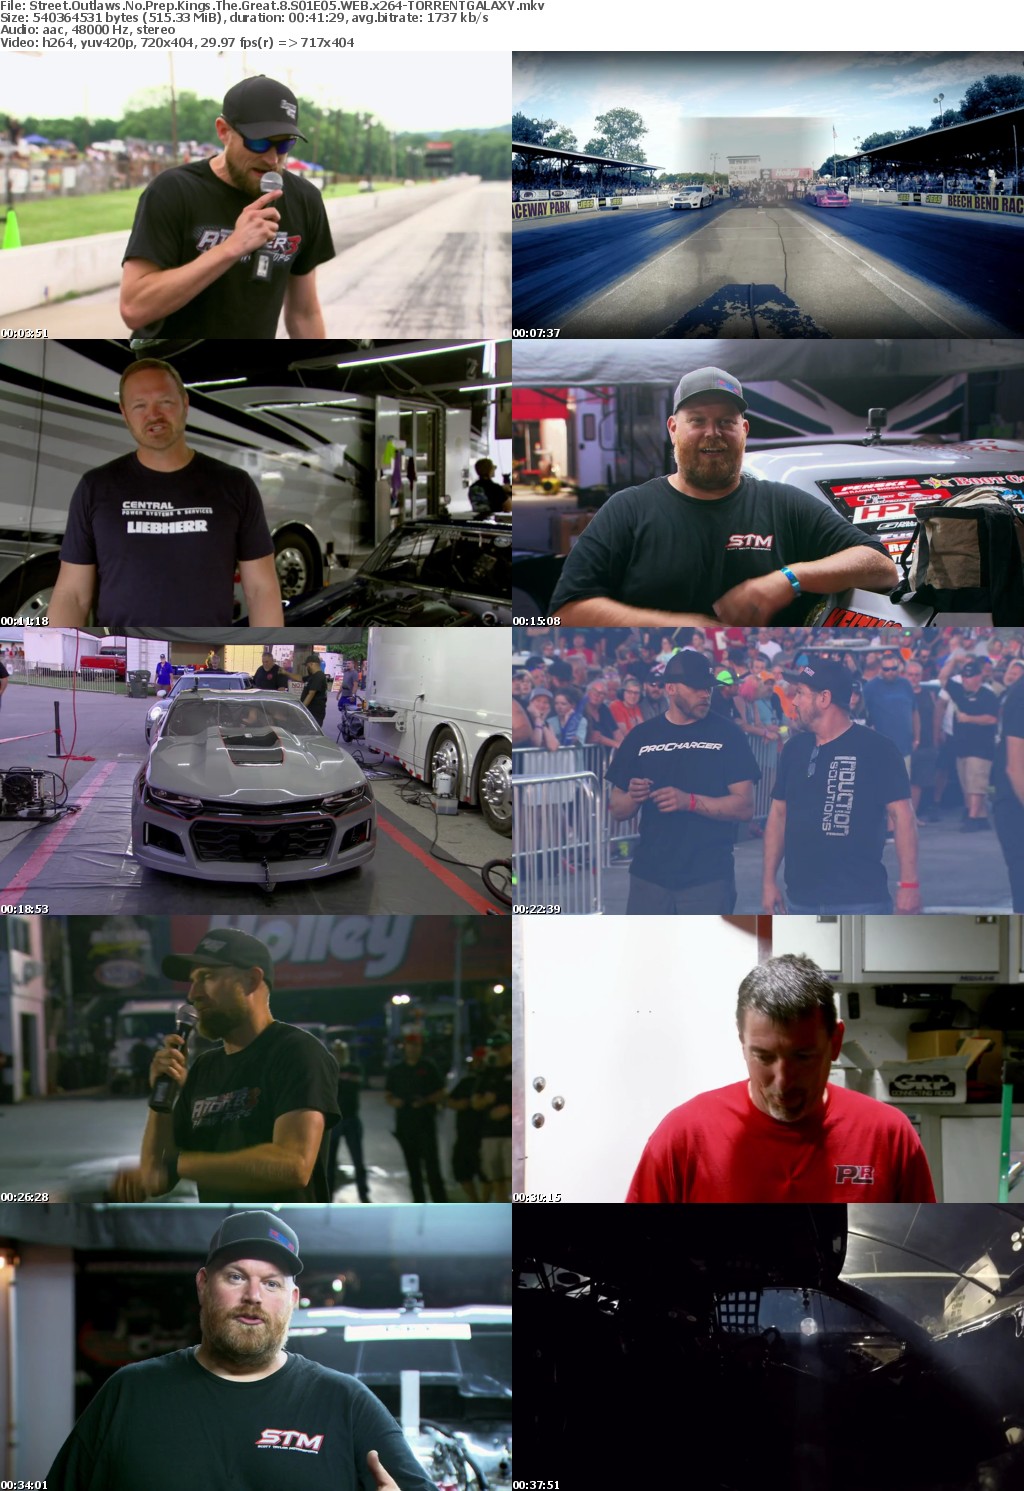 Street Outlaws No Prep Kings The Great 8 S01E05 WEB x264-GALAXY